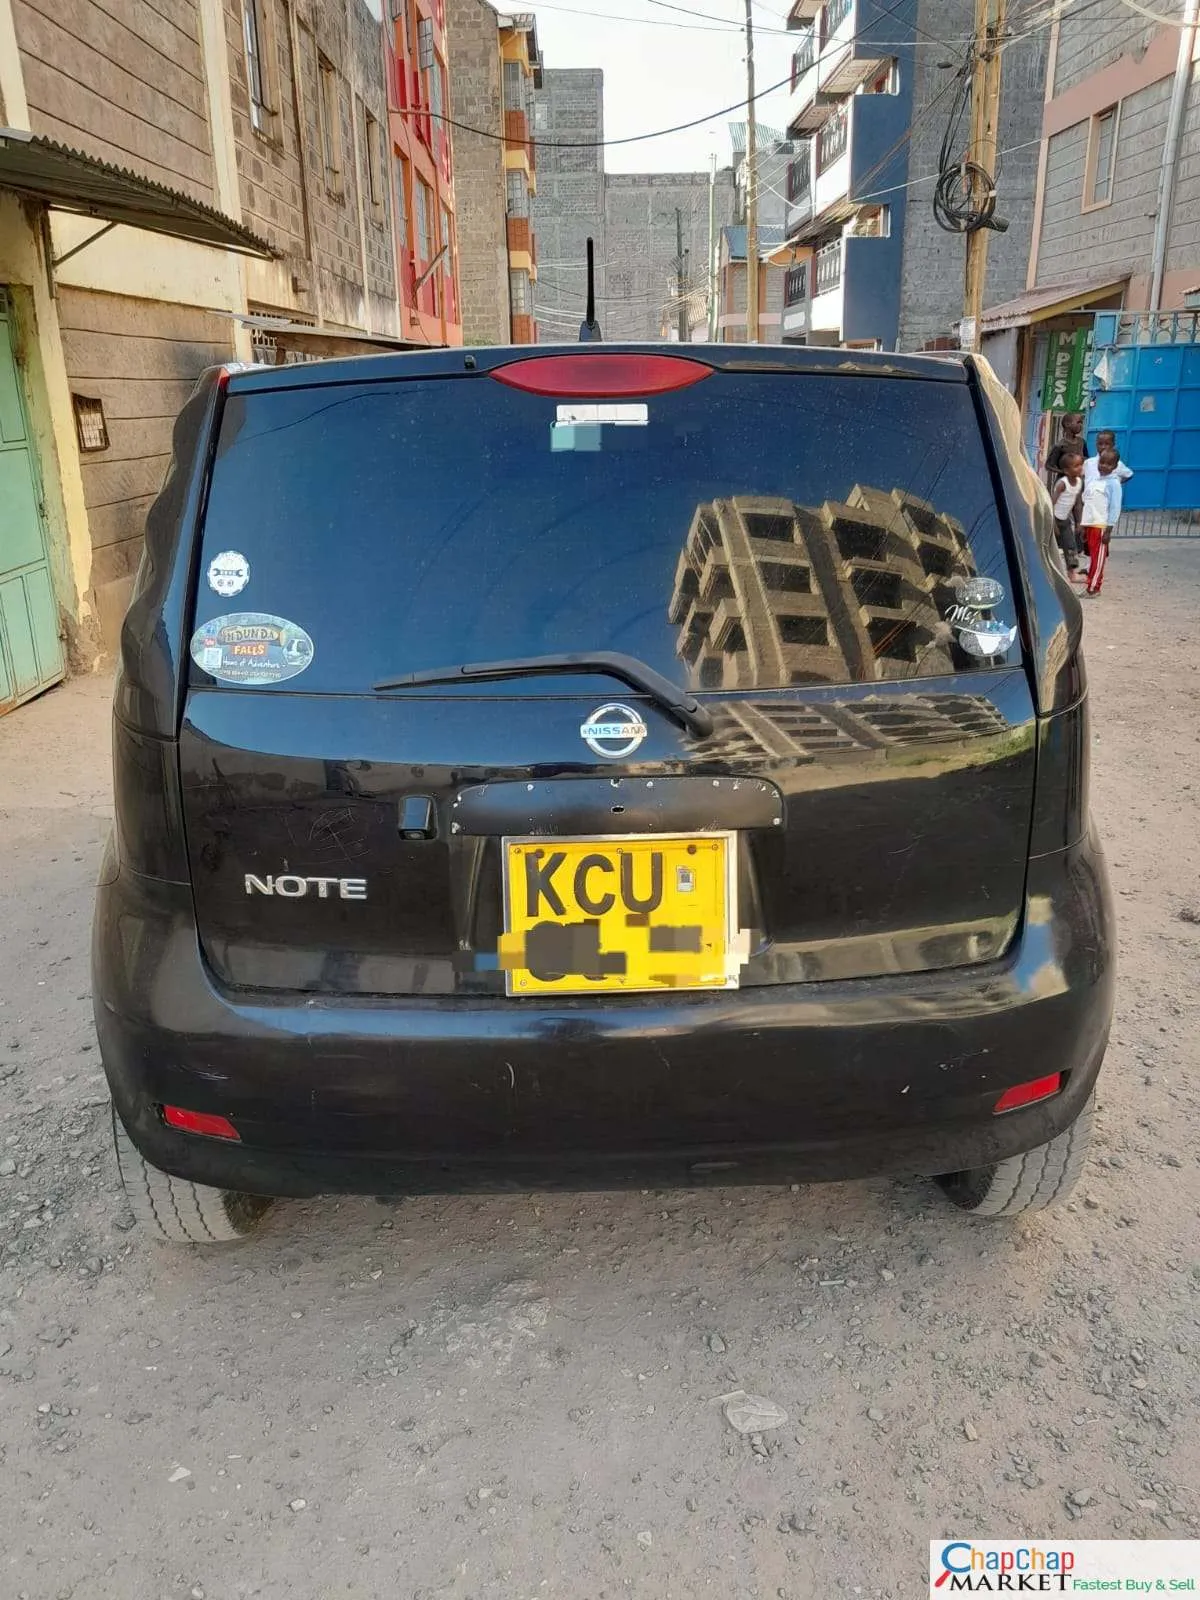 Nissan Note Kenya 🔥 QUICK SALE You Pay 20% Deposit Trade in Ok Nissan Note for sale in kenya hire purchase installments EXCLUSIVE 🔥